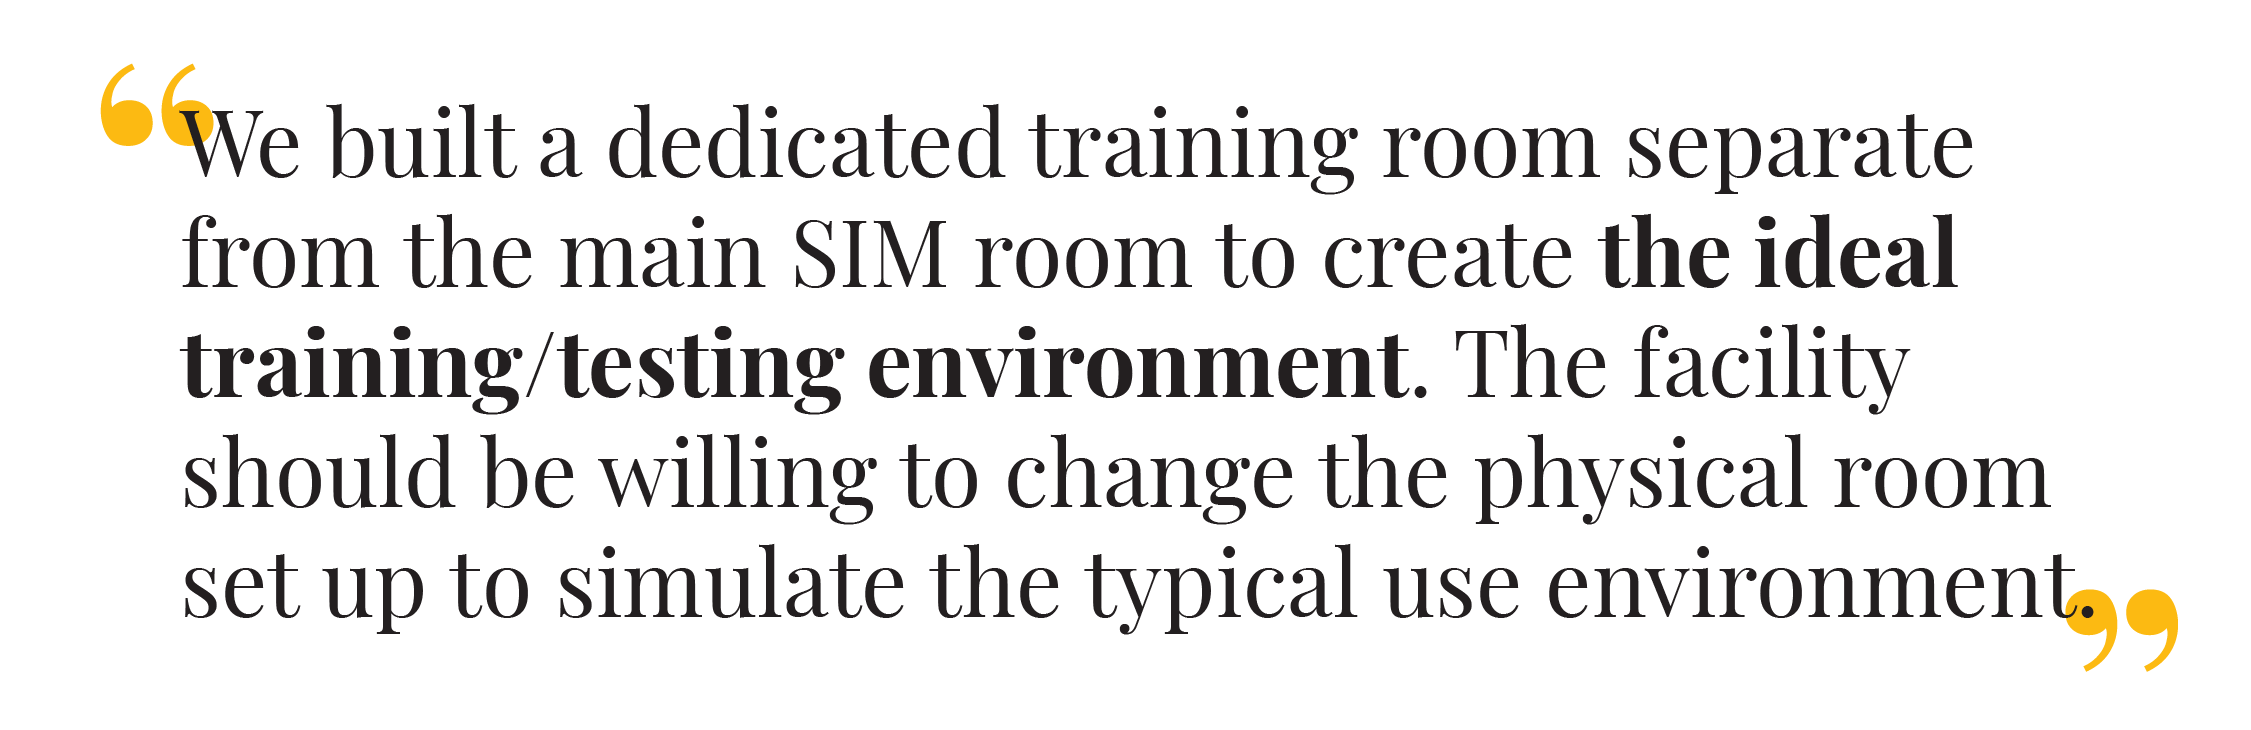 christine lally quote about the fieldwork simulation room that has the ideal training and testing environment